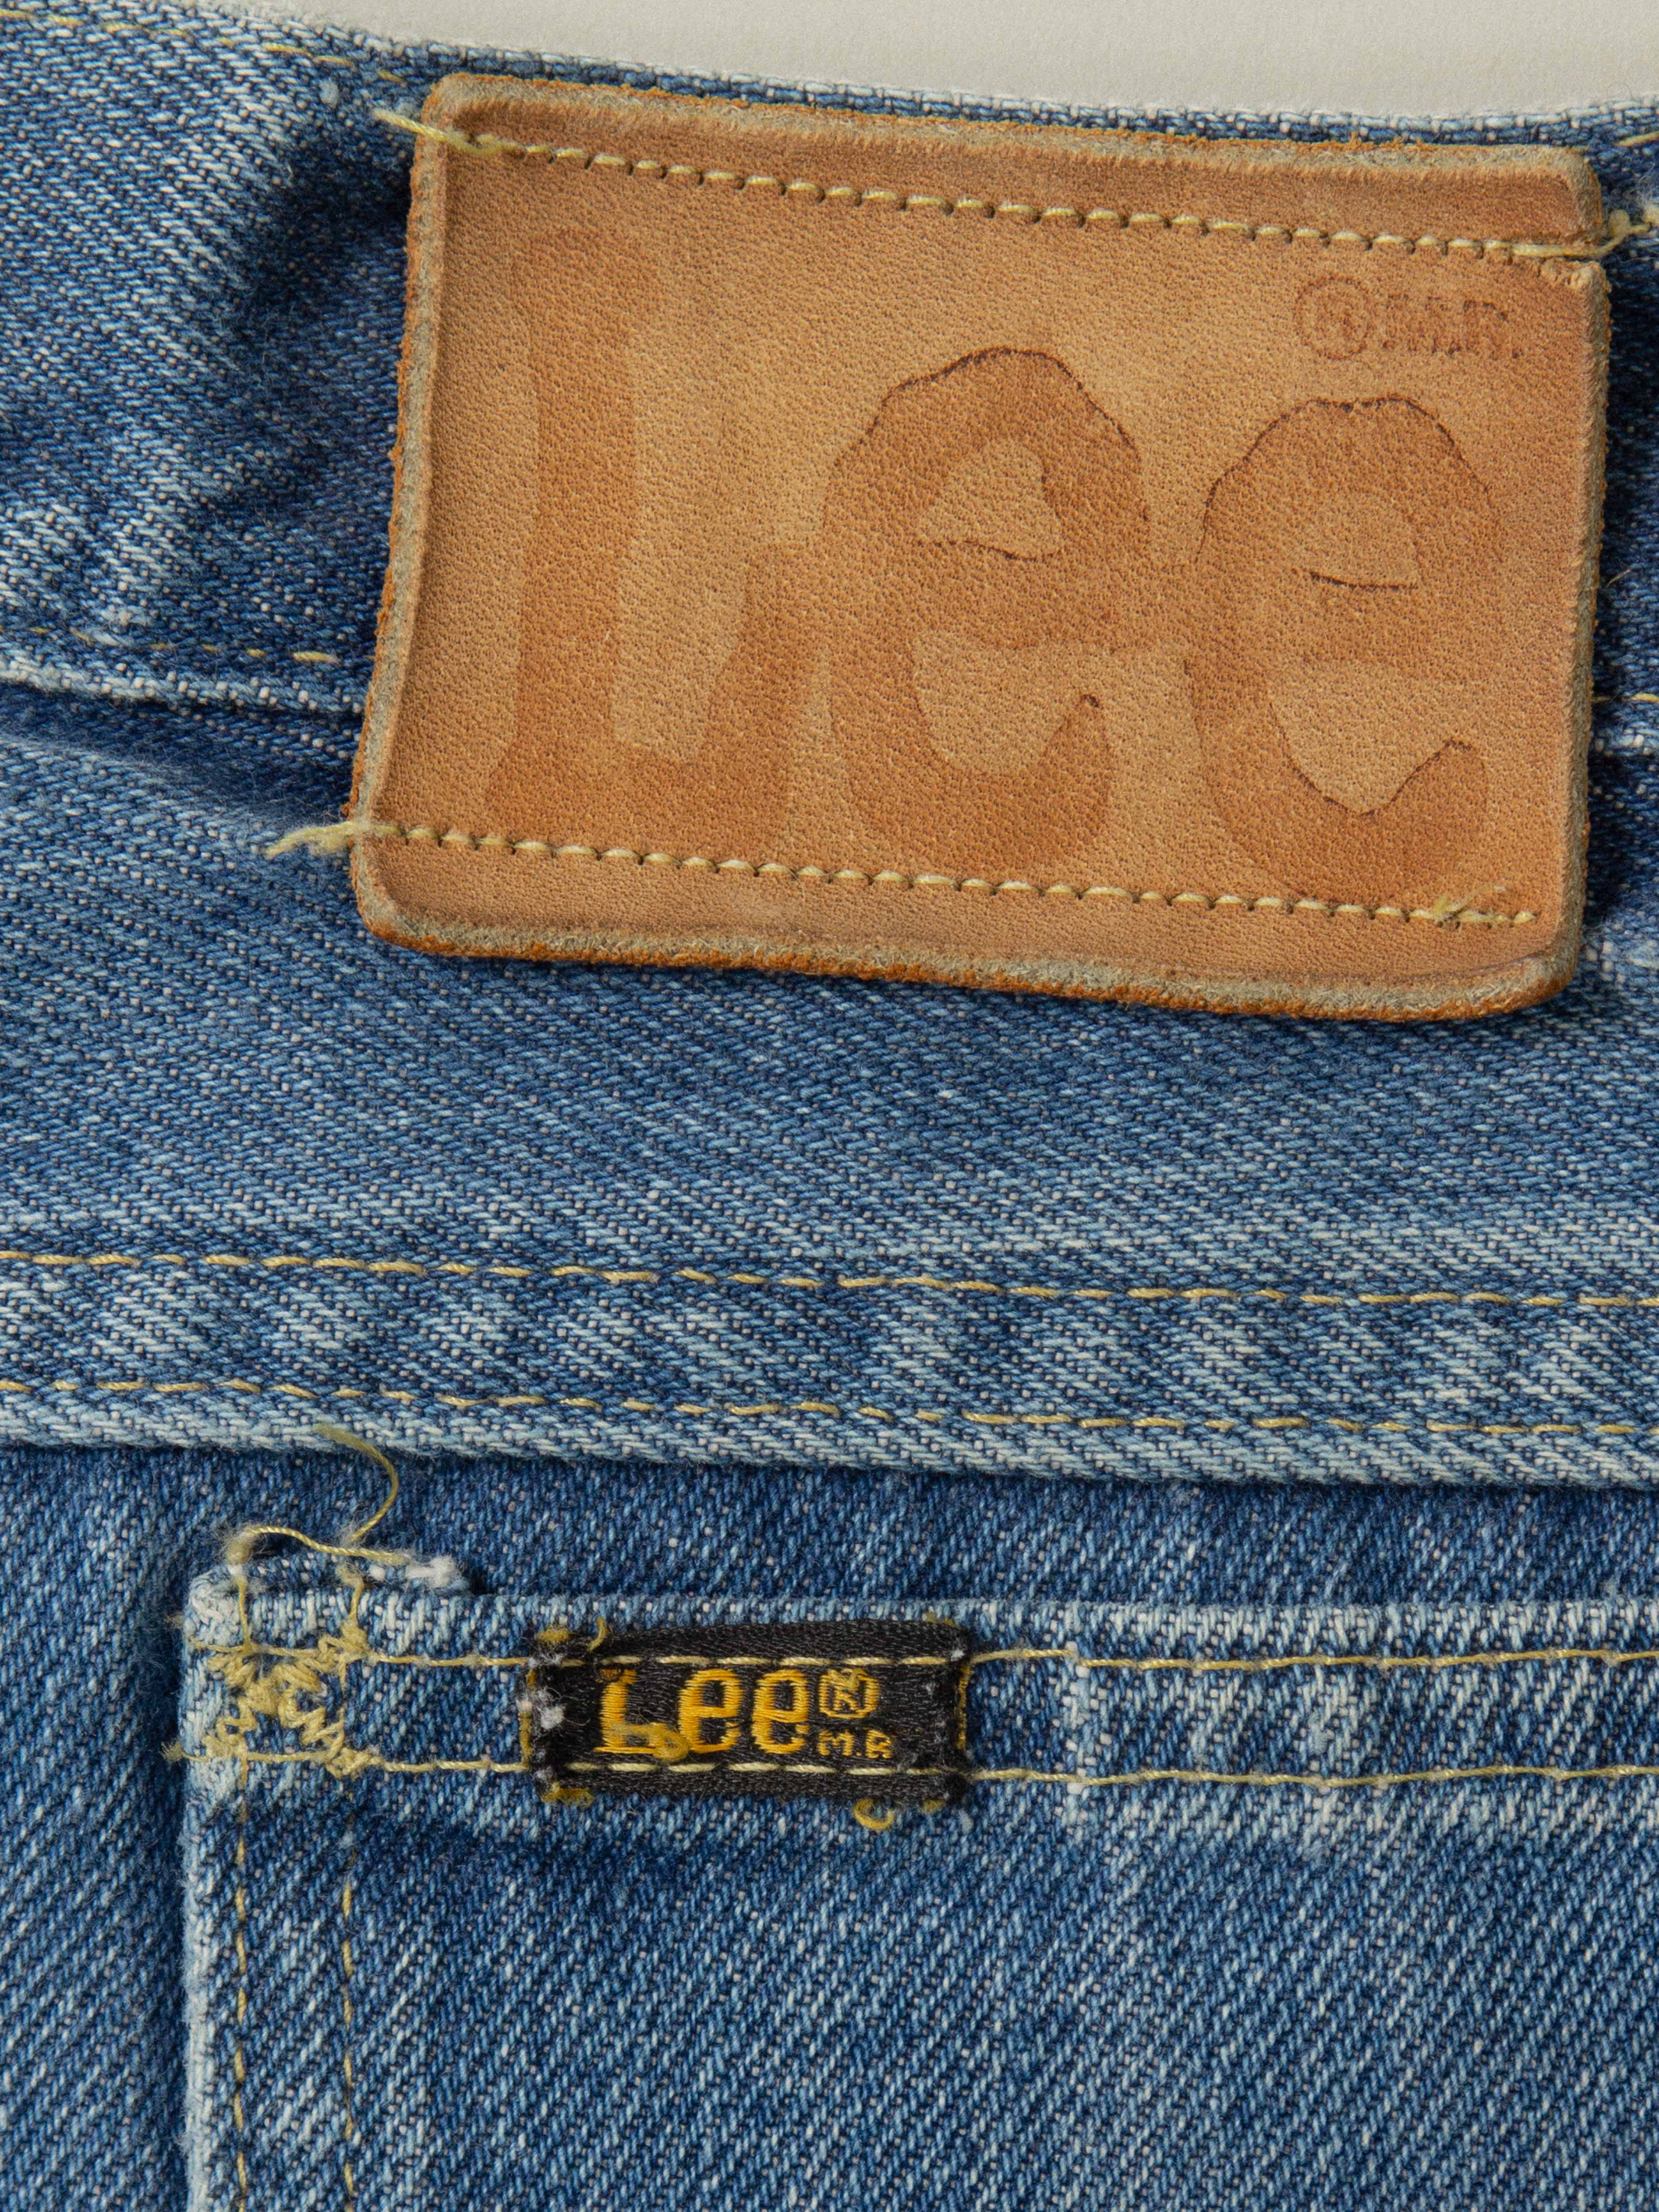 Lee Riders Jeans 80s/90s Vintage Union Made in USA